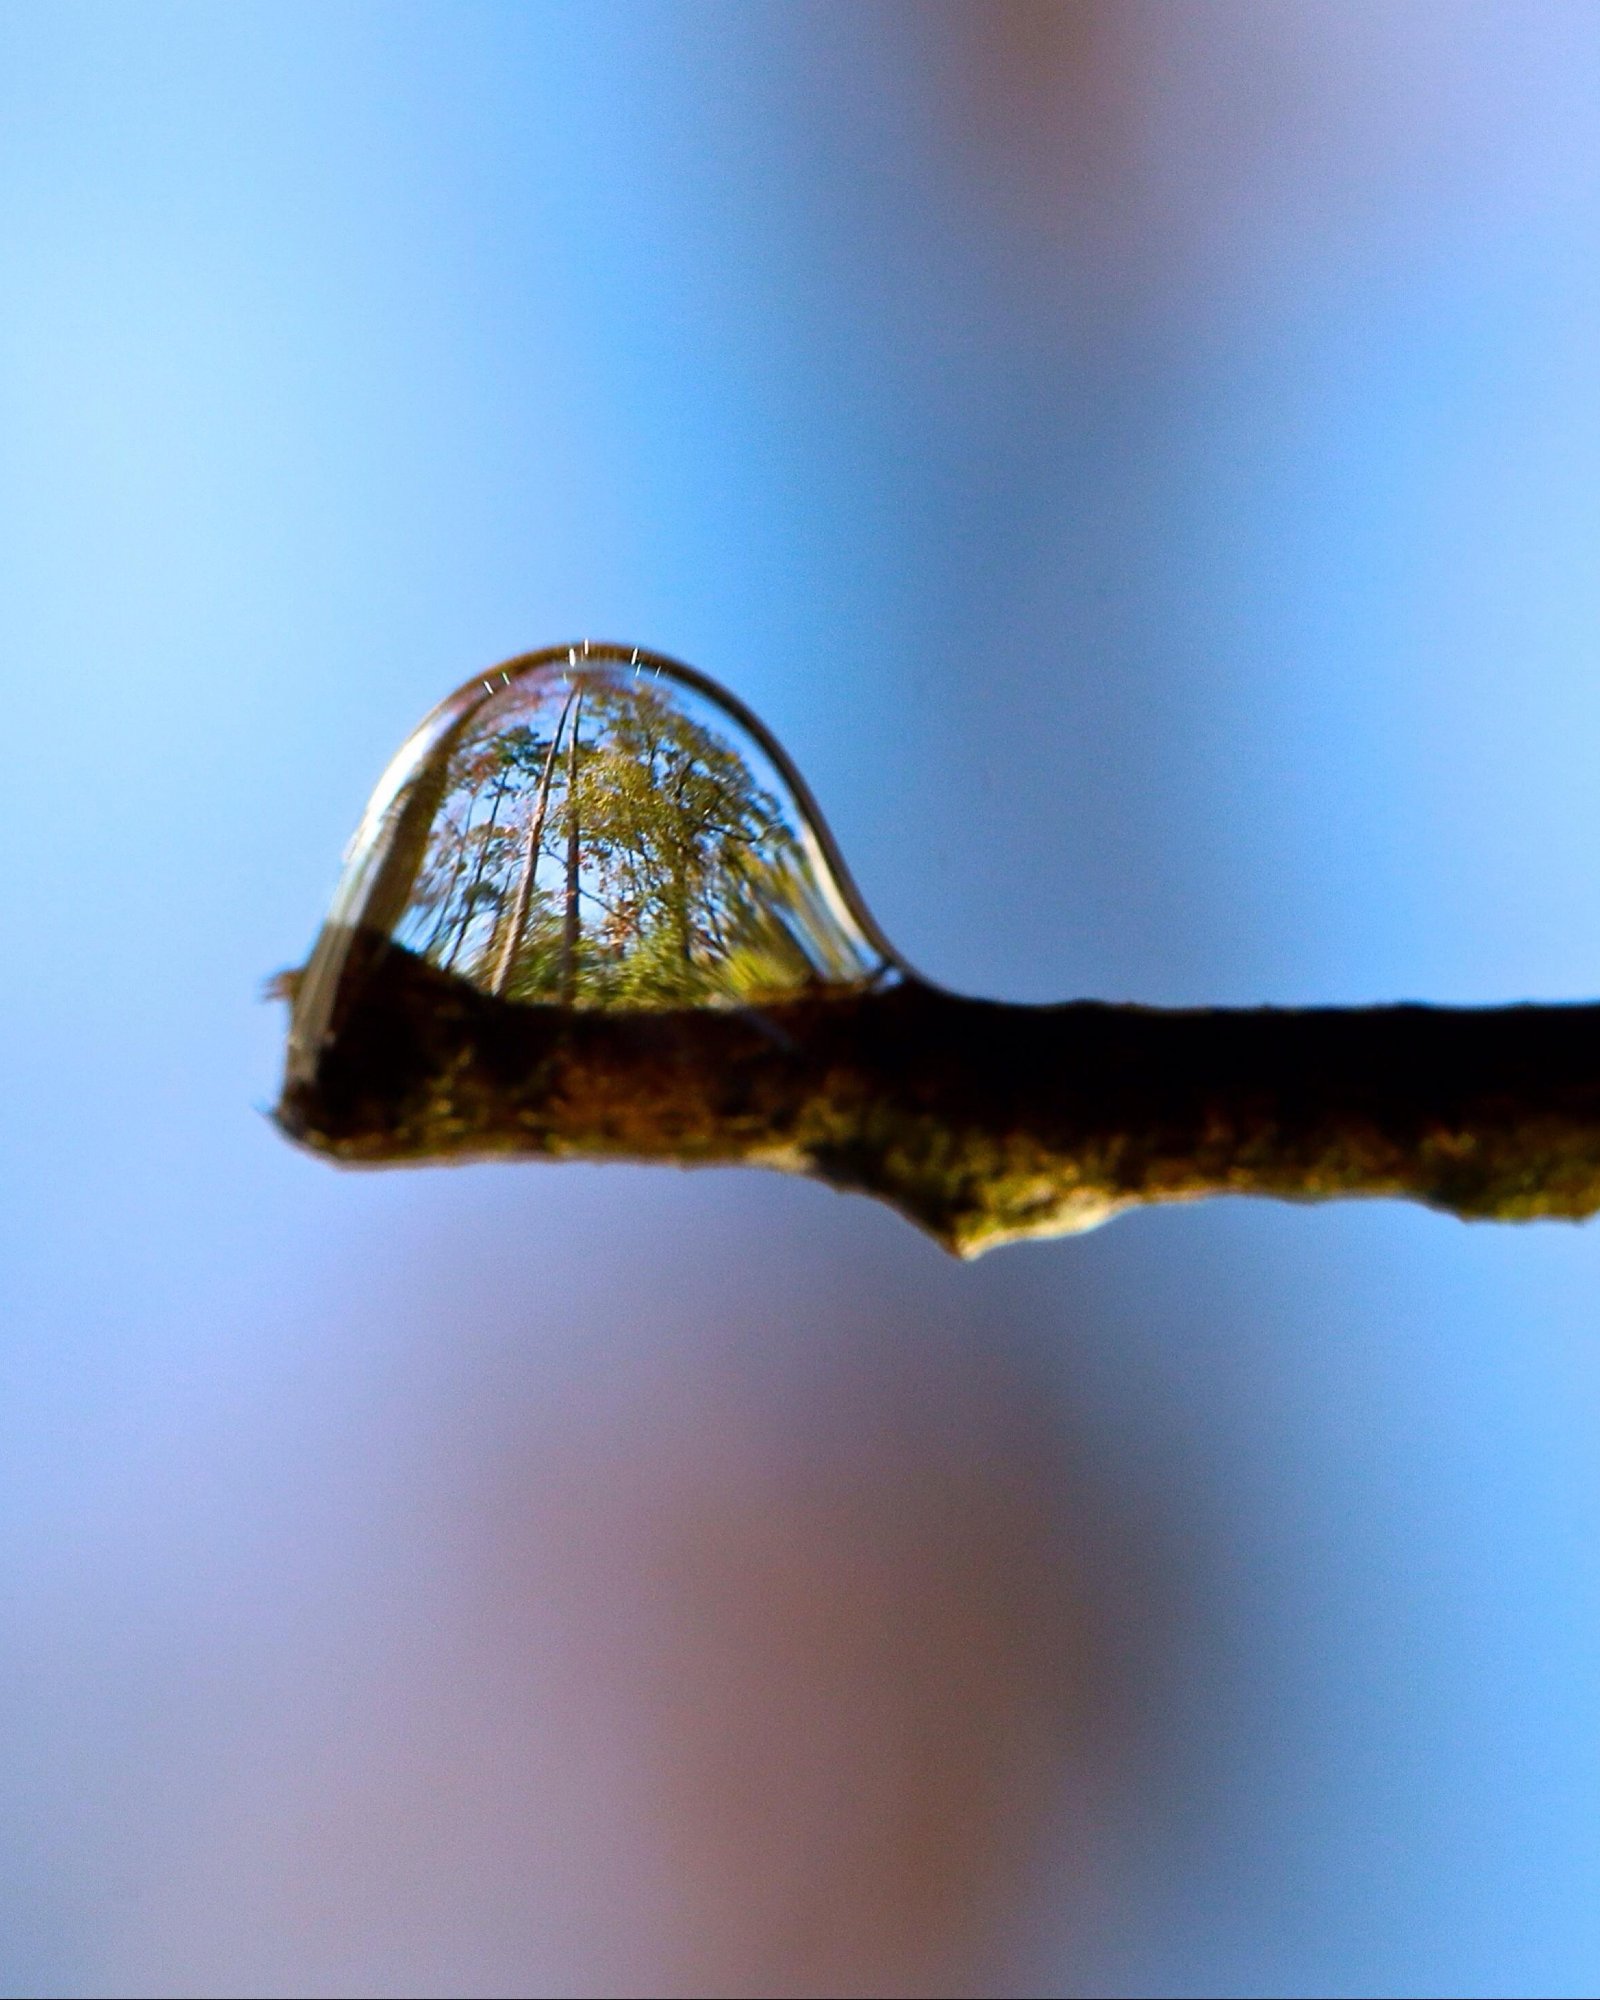 trees reflected in a water droplet